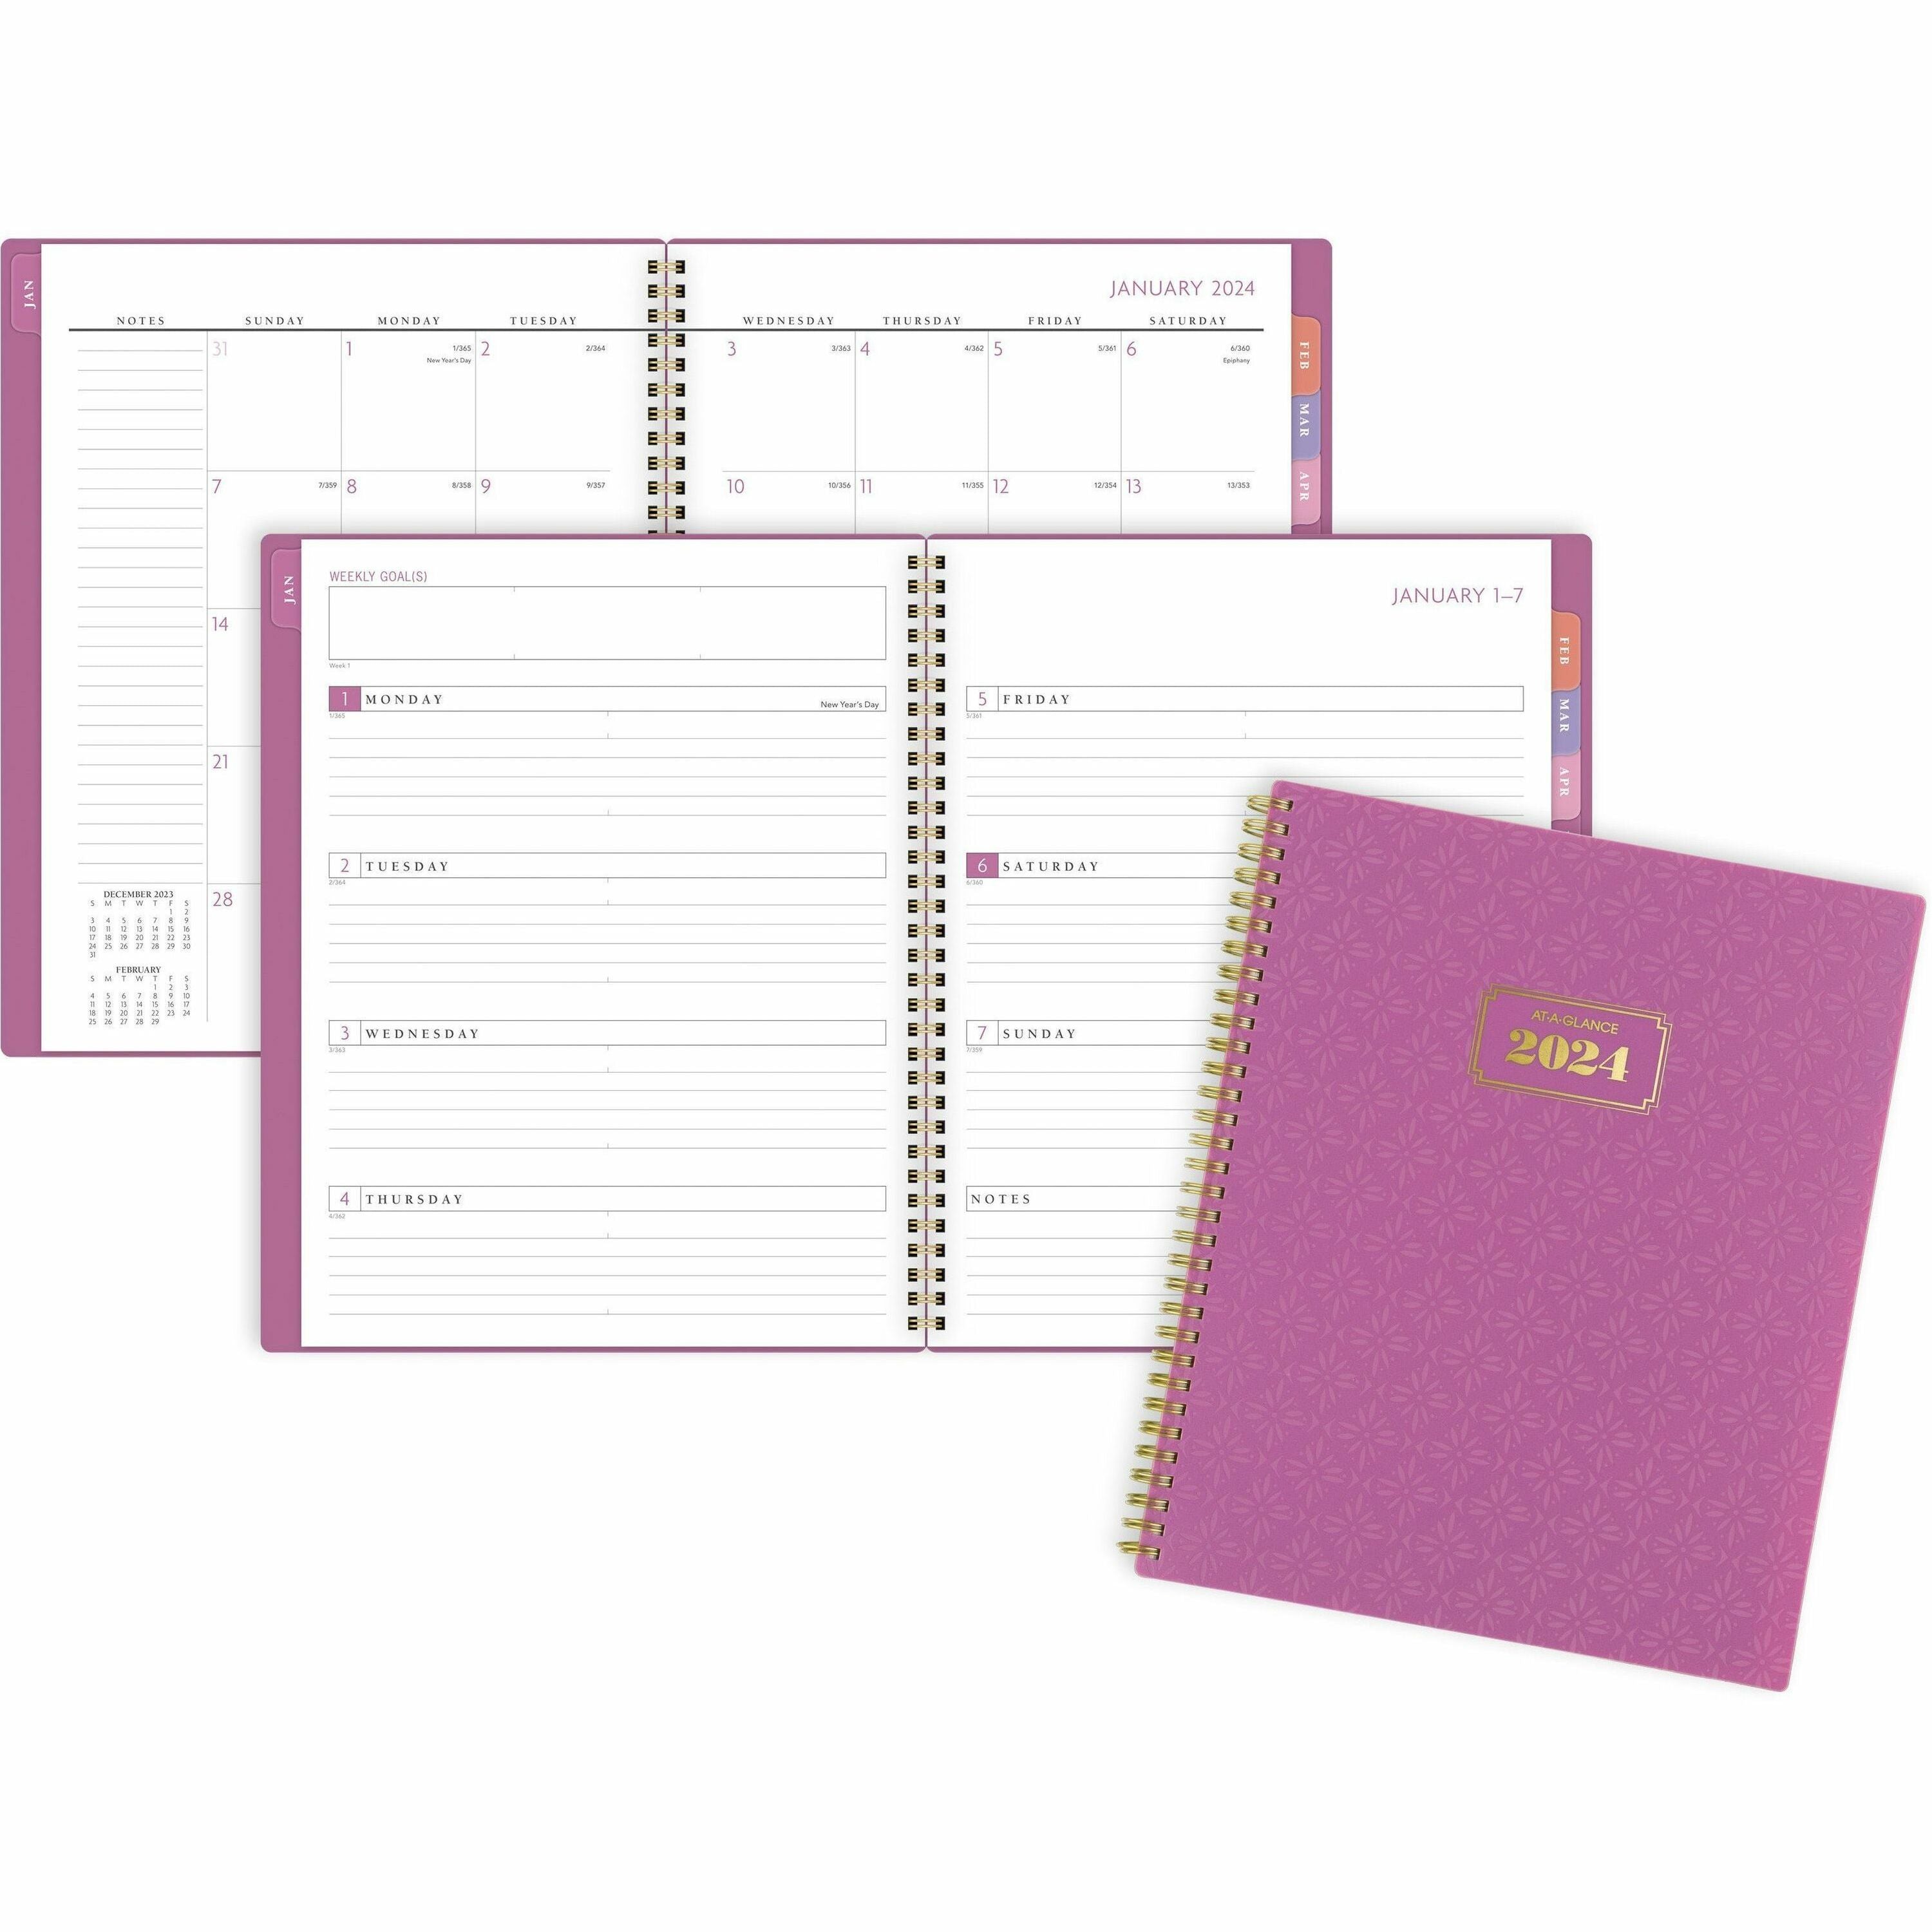 at-a-glance-badge-weekly-monthly-planner-large-size-weekly-monthly-13-month-january-2024-january-2025-8-1-2-x-11-sheet-size-twin-wire-purple-white-paper-bleed-resistant-dated-planning-page-reference-calendar-durable-flexib_aag1675t905 - 1